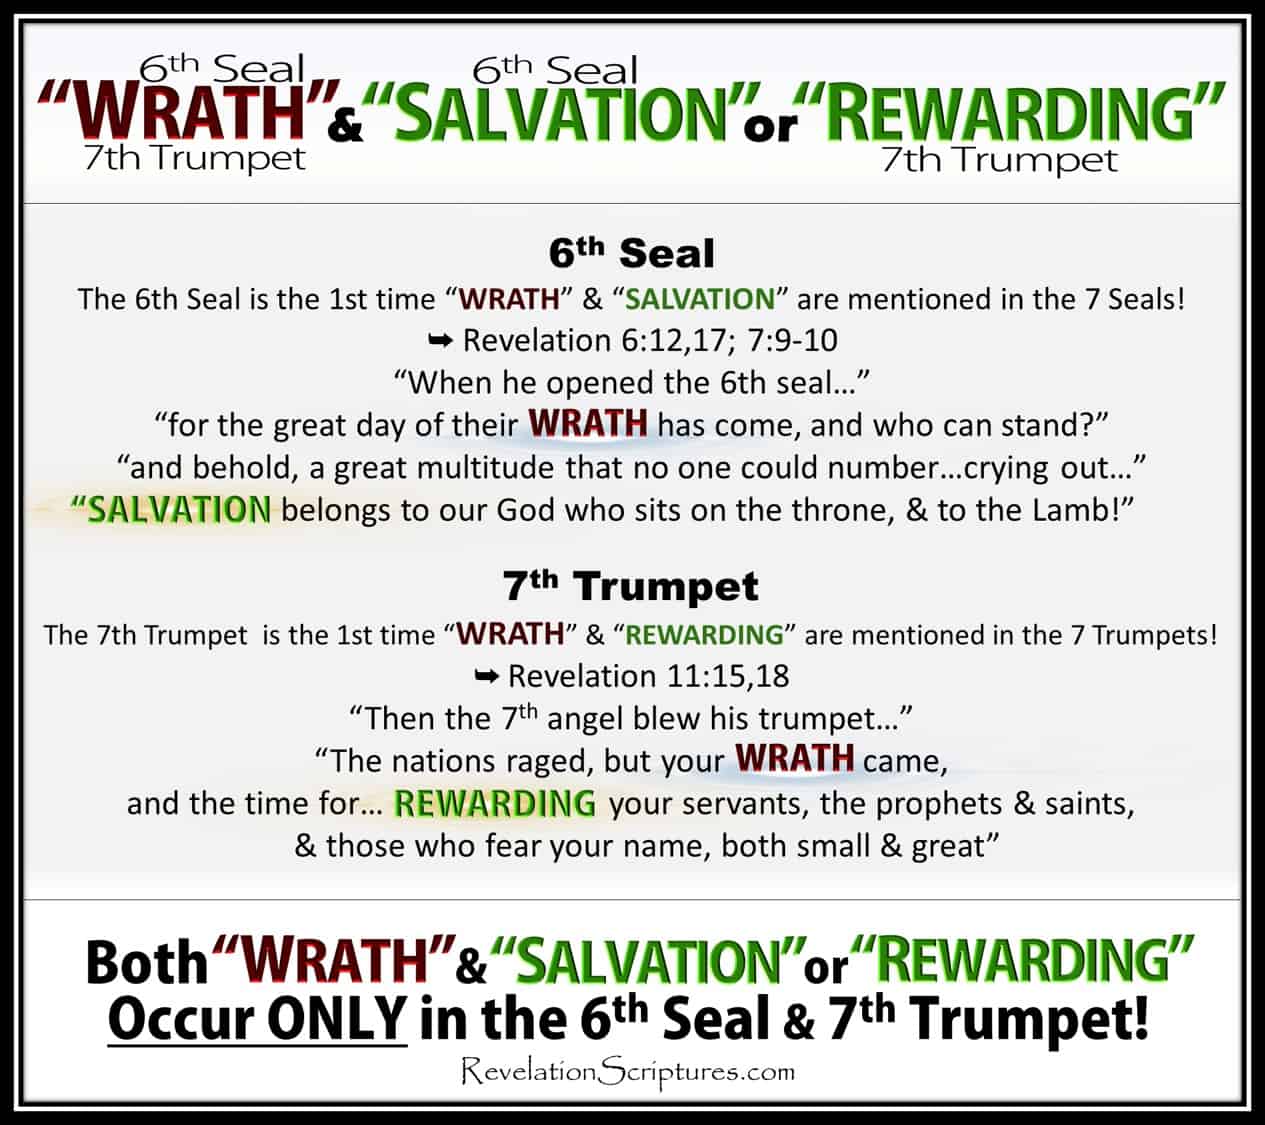 Wrath,day of wrath,salvation,rewarding,time for rewarding,when is the reward in revelation,7th Trumpet,seventh trumpet,6th Seal,sixth seal,great multitude,great crowd,rev 7,rev 11,revelation 7,revelation 11,revelation chapter 7,revelation chapter 11